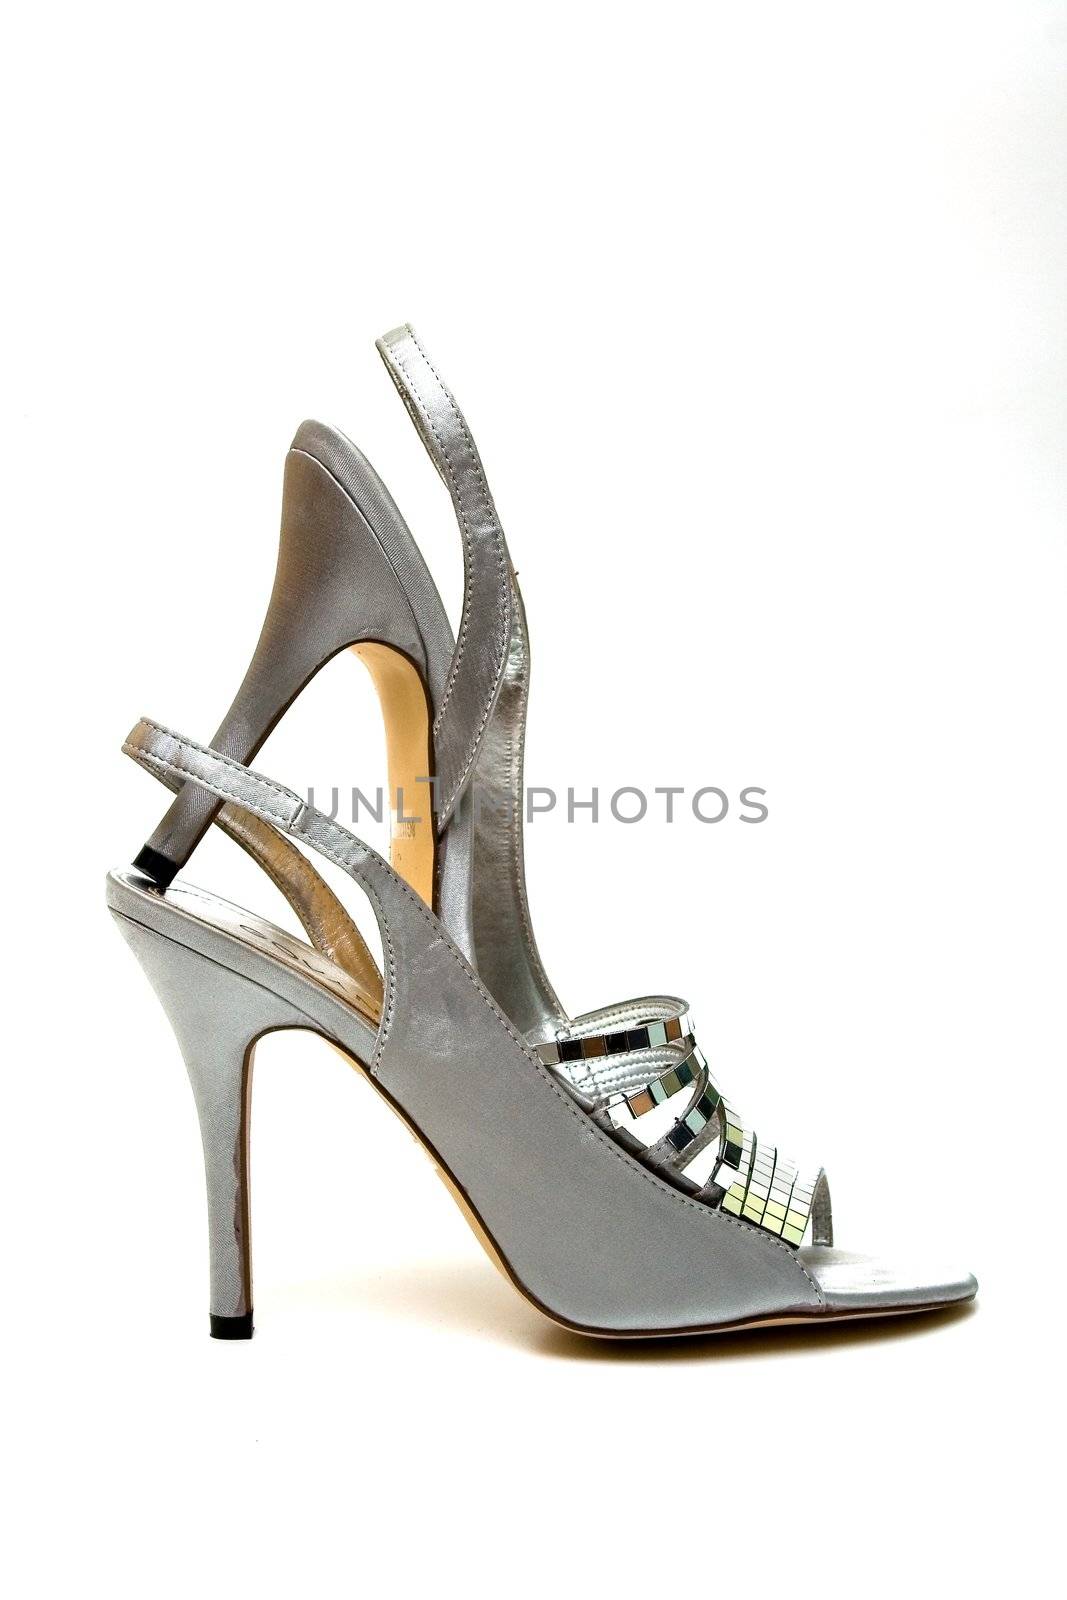 Elegant female shoes with a high heel on a white background